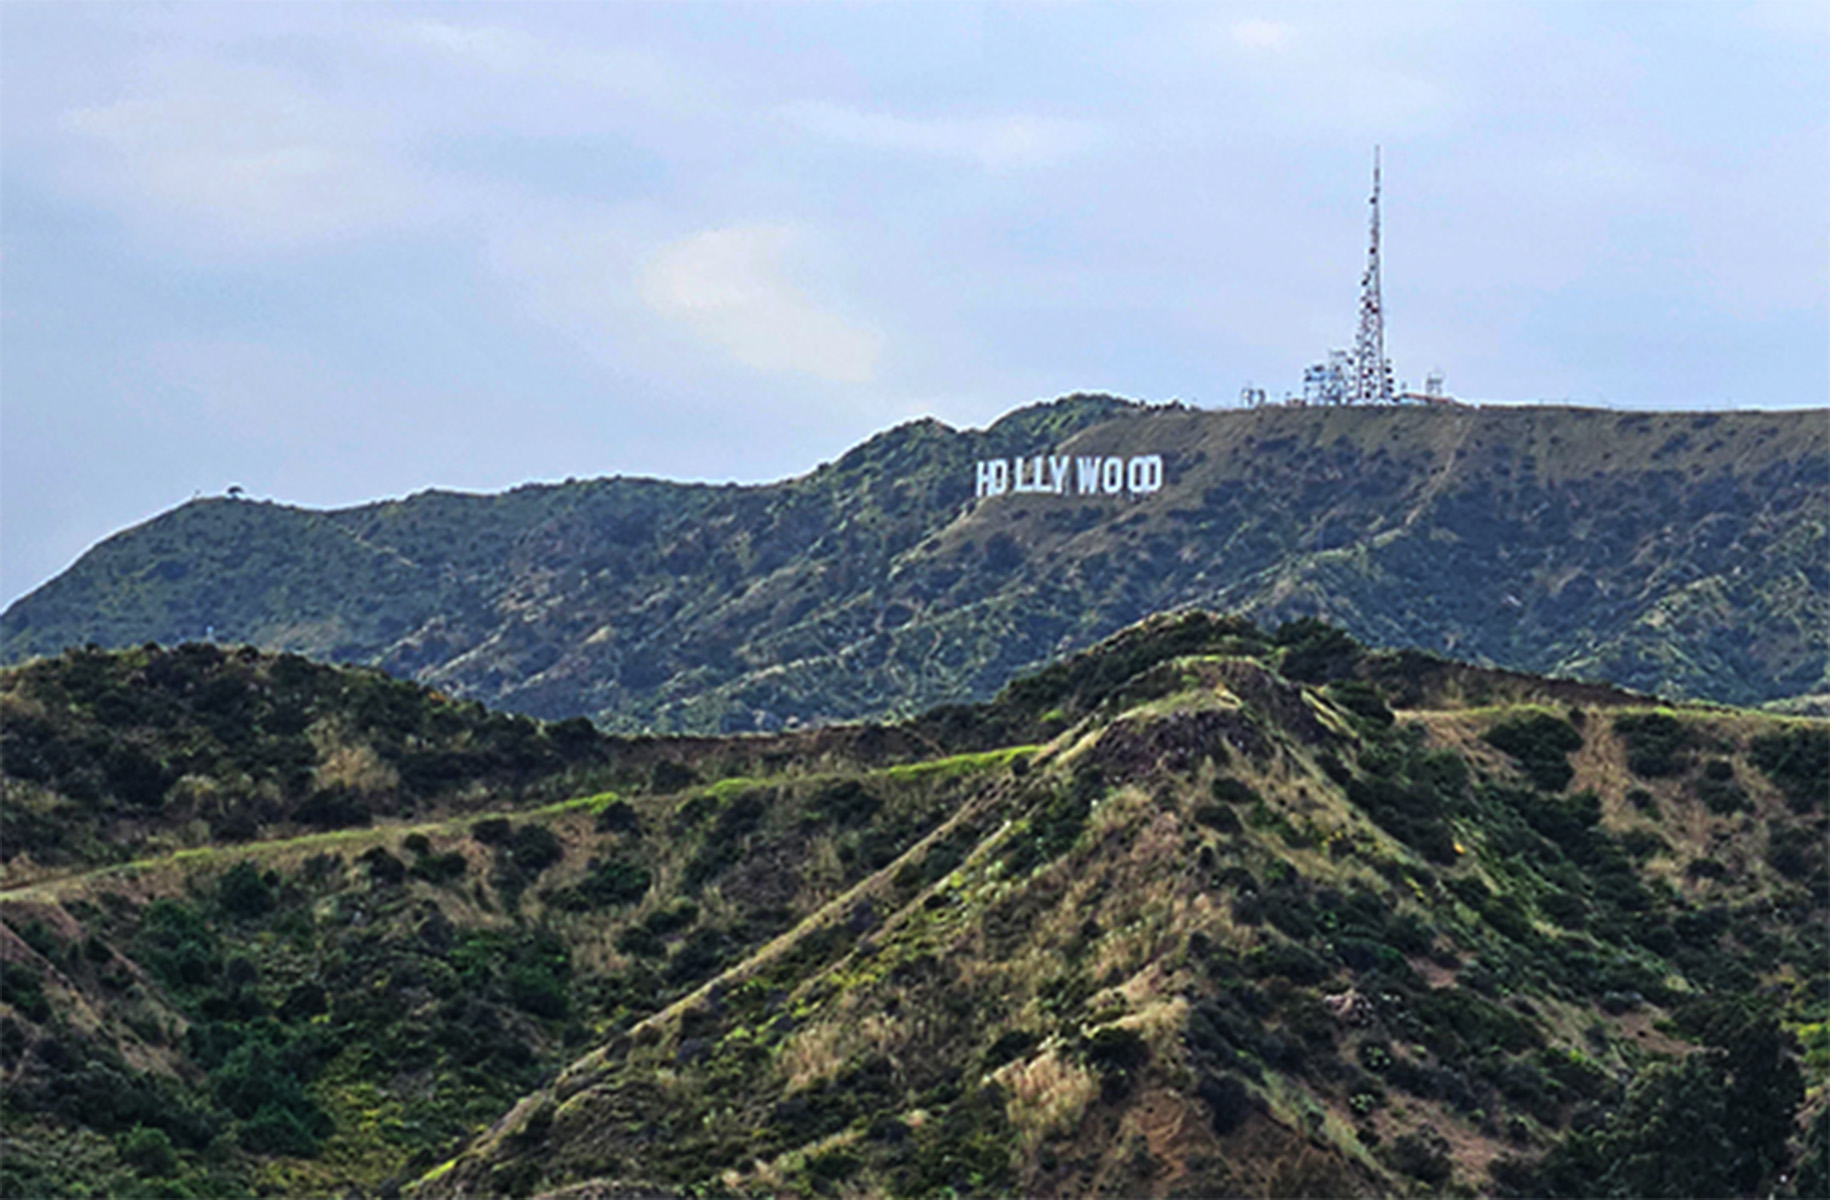 The Hollywood sign in Los Angeles.